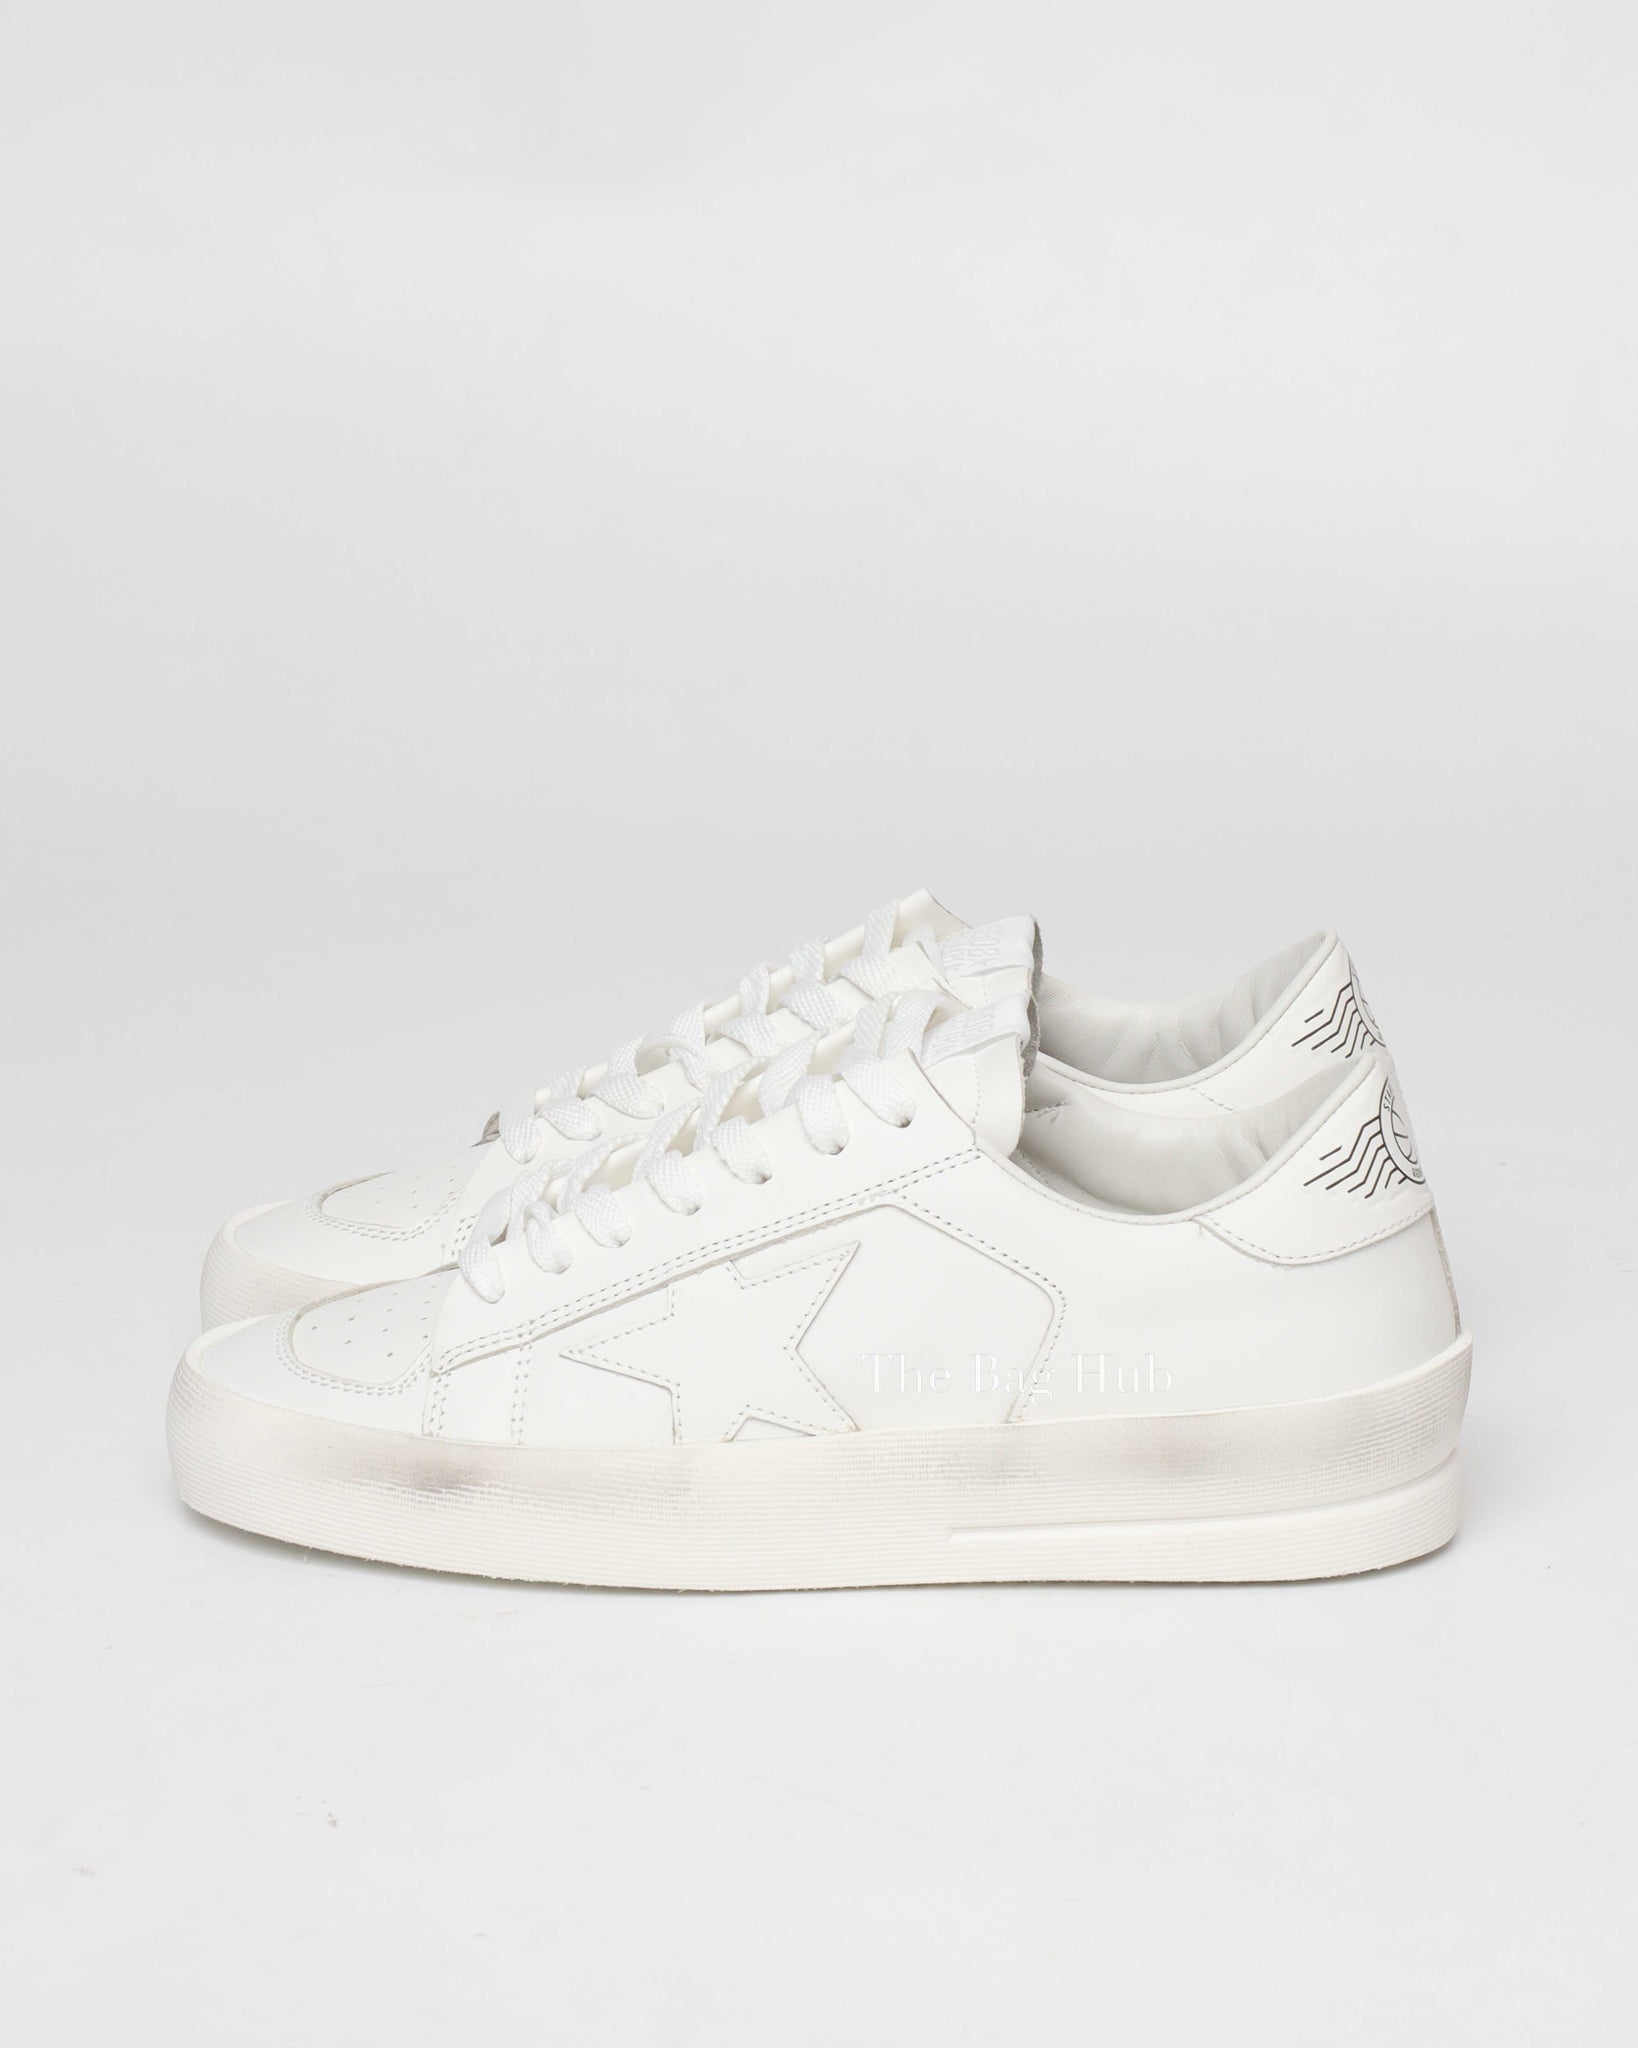 Golden Goose White Leather Stardan Sneakers Size 36-6